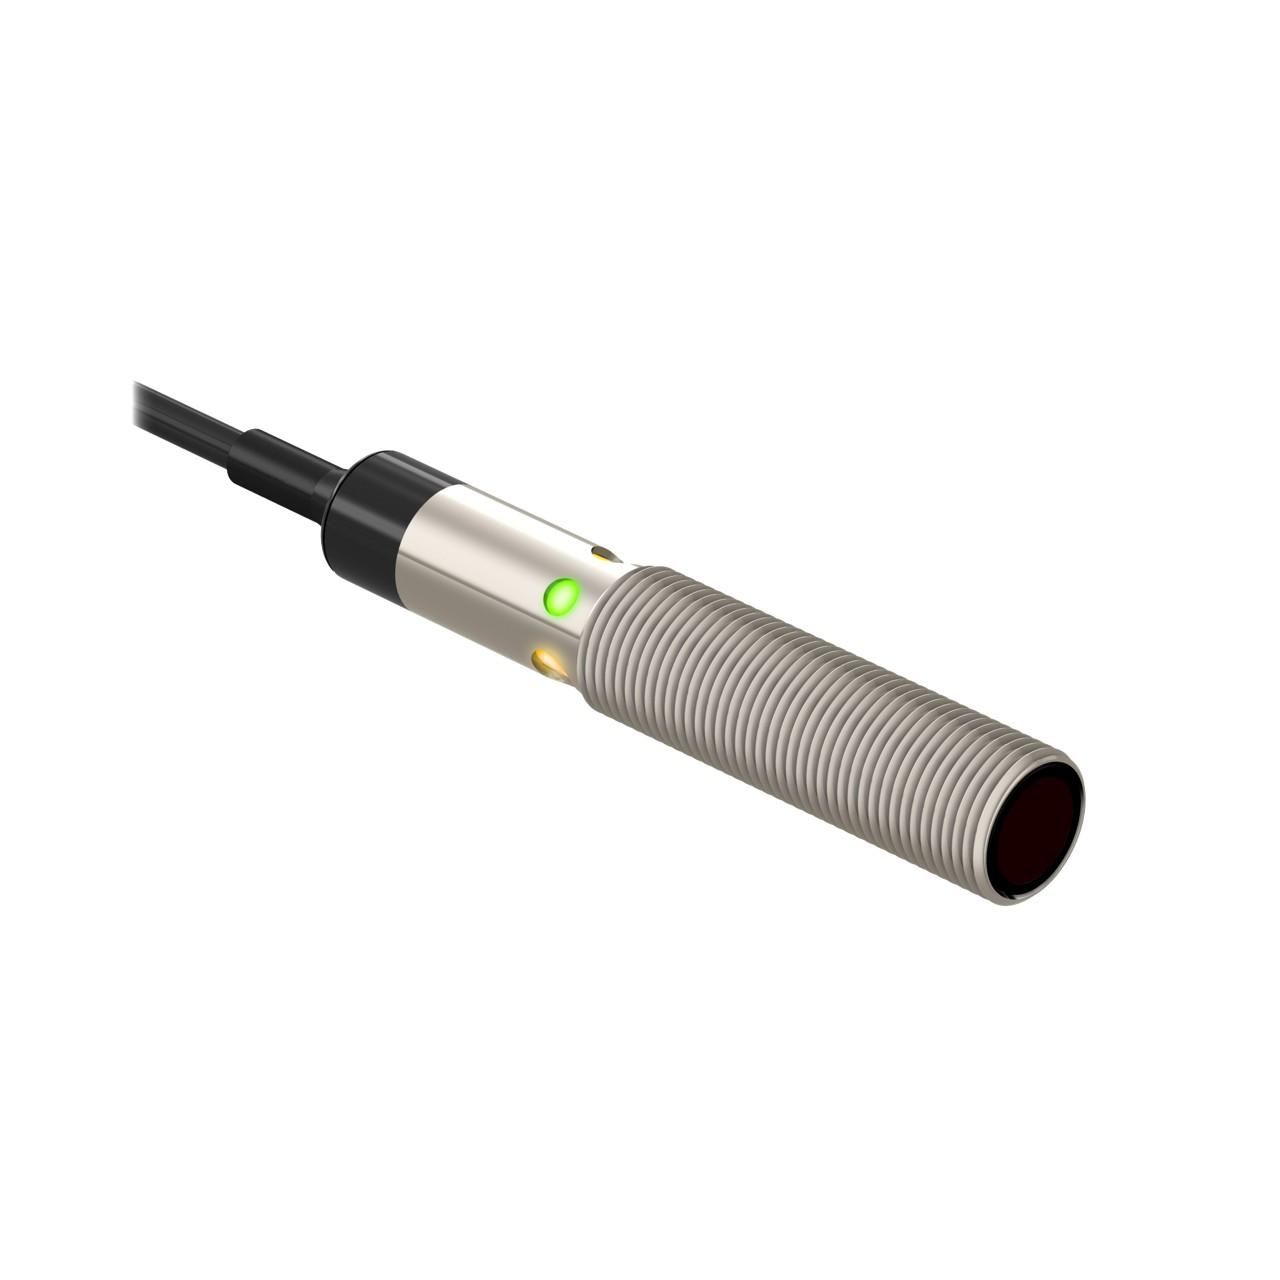 Banner M12EQPMA Photo-electric emitter with through-beam system / opposed mode - Banner Engineering (M12 barrel series - M12) - Part #77749 - Visible red light (660nm) - Supply voltage 10Vdc-30Vdc (12Vdc / 24Vdc nom.) - Pre-wired with 6" / 150mm PUR pigtail terminated wi